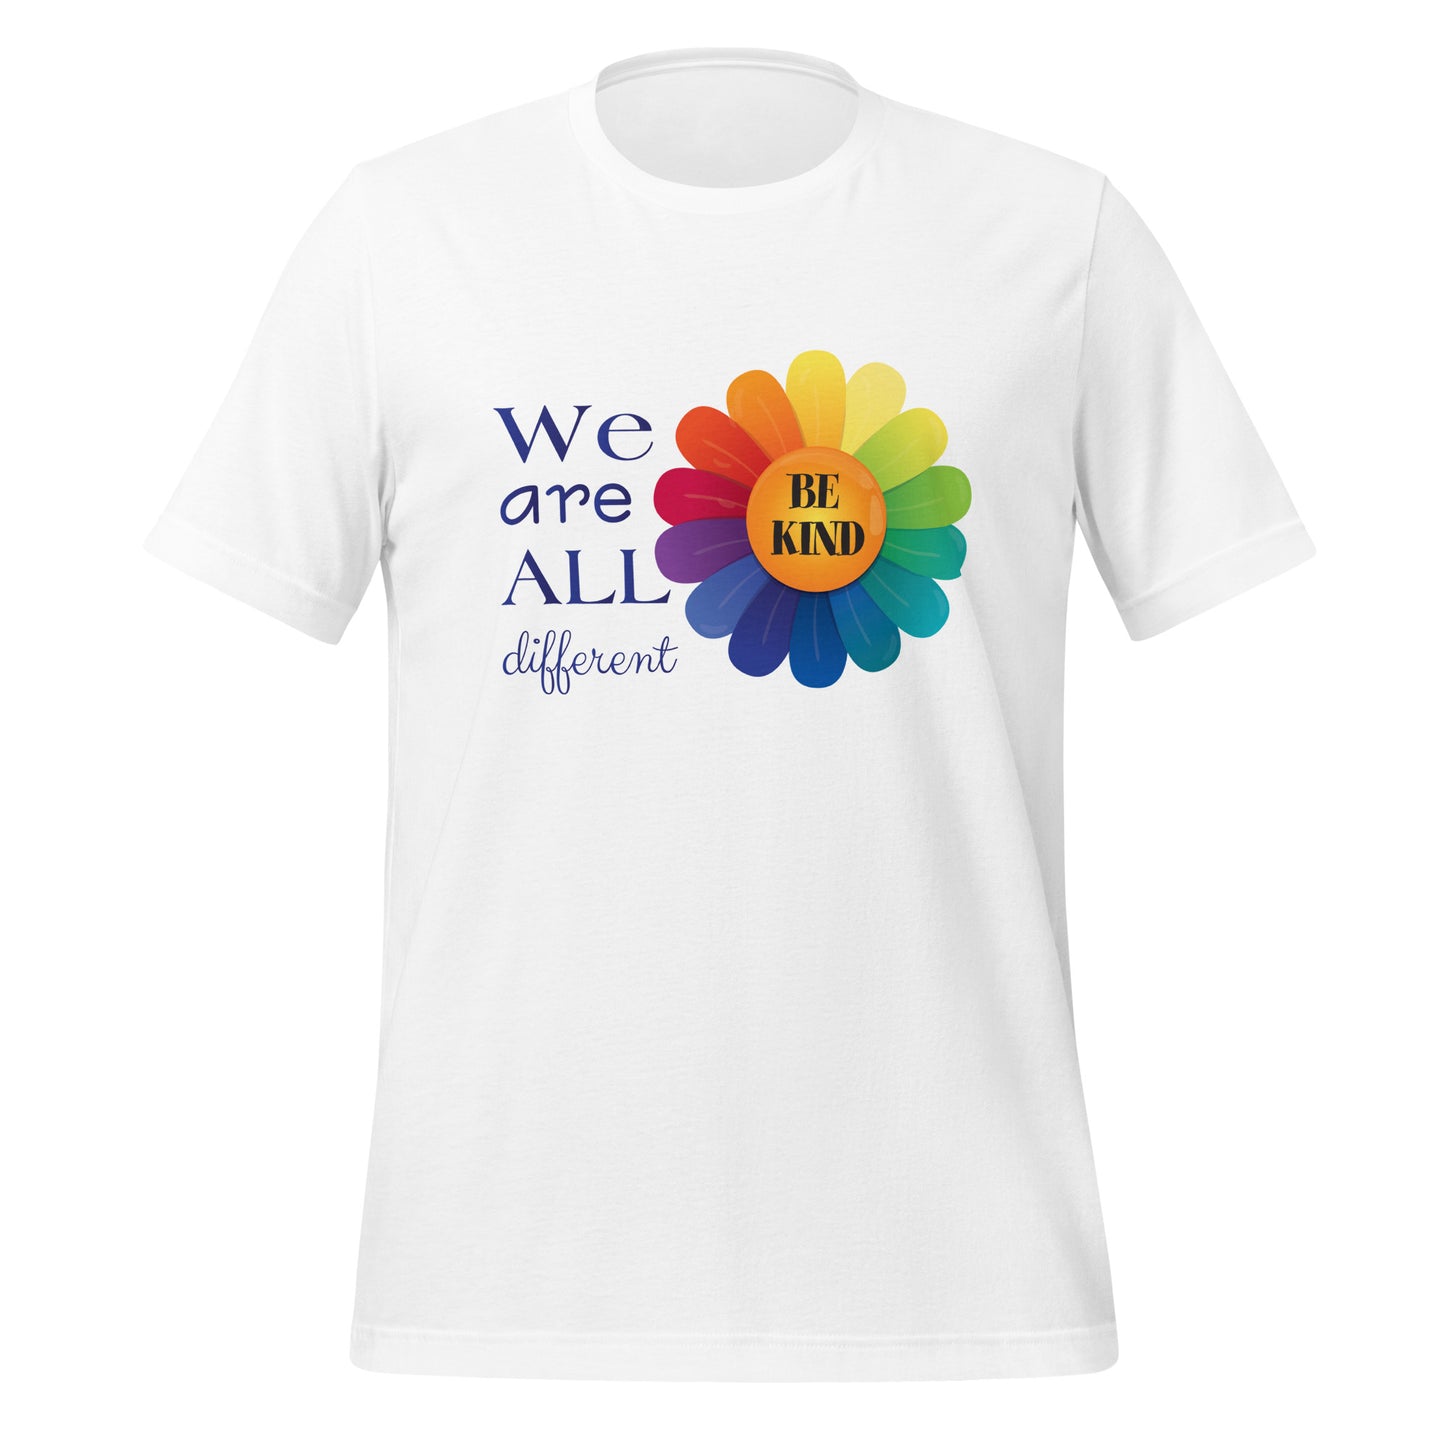 We are all Different P502 Unisex t-shirt